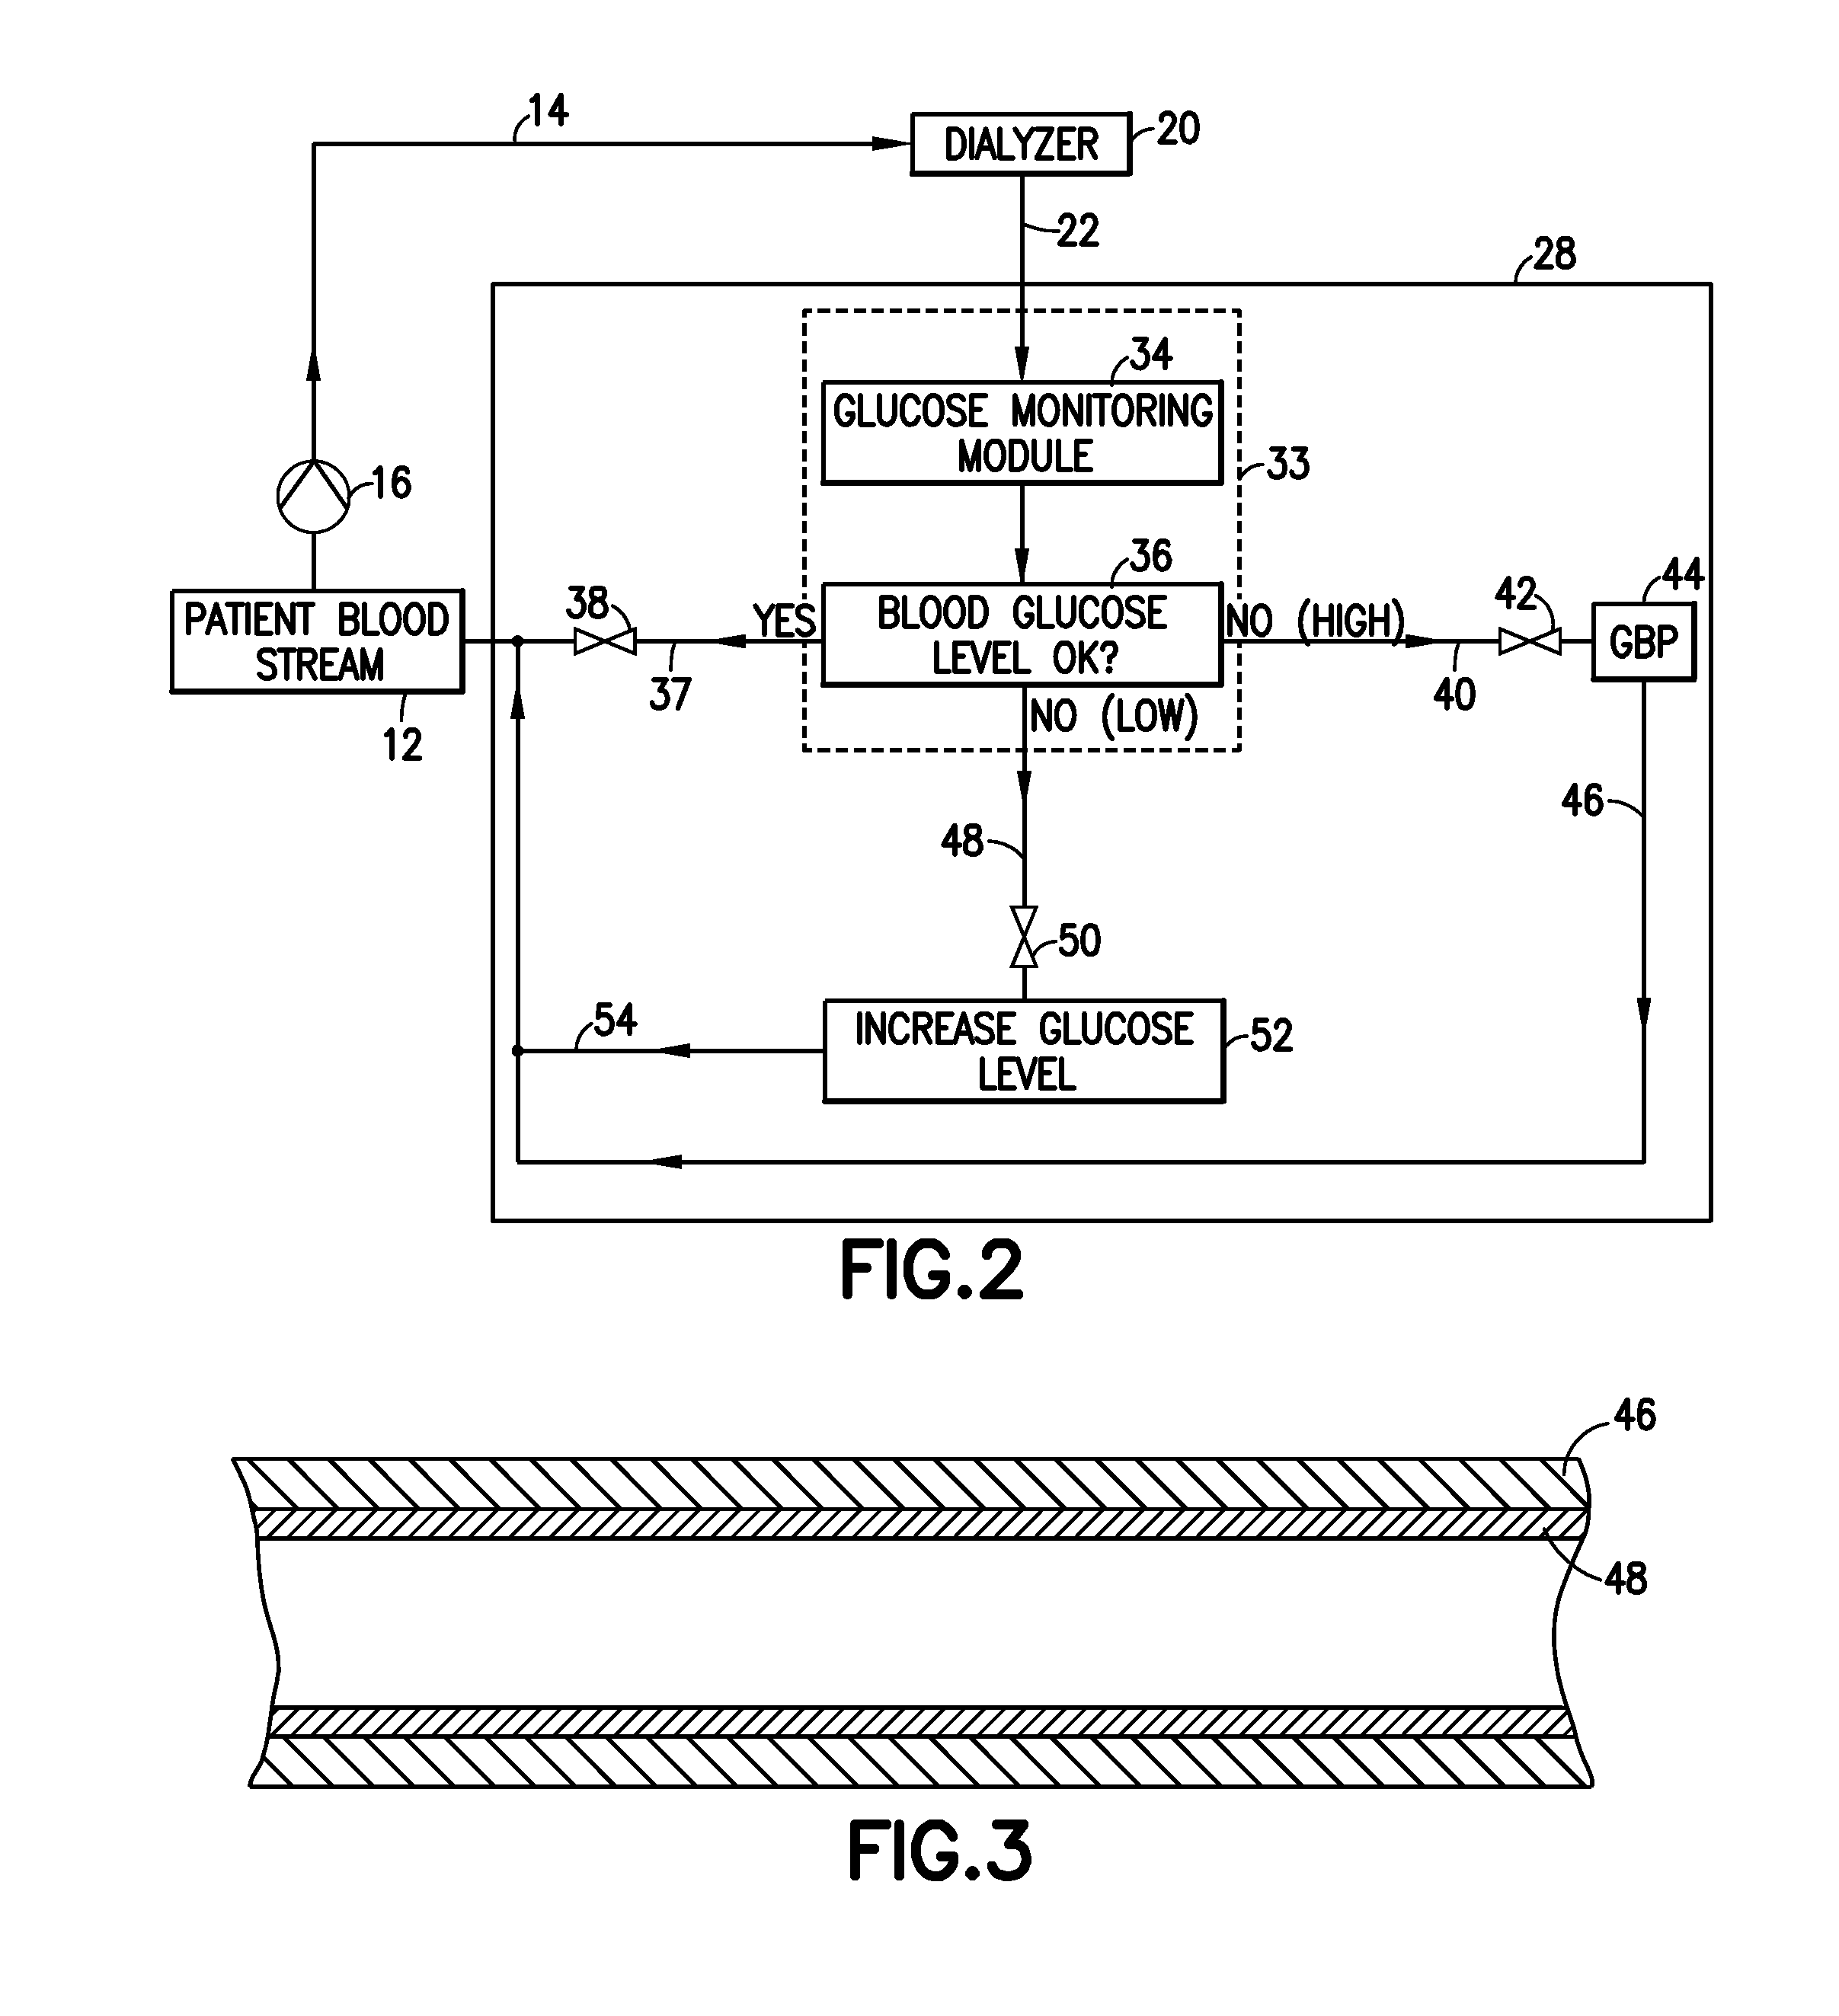 Glucose management and dialysis method and apparatus